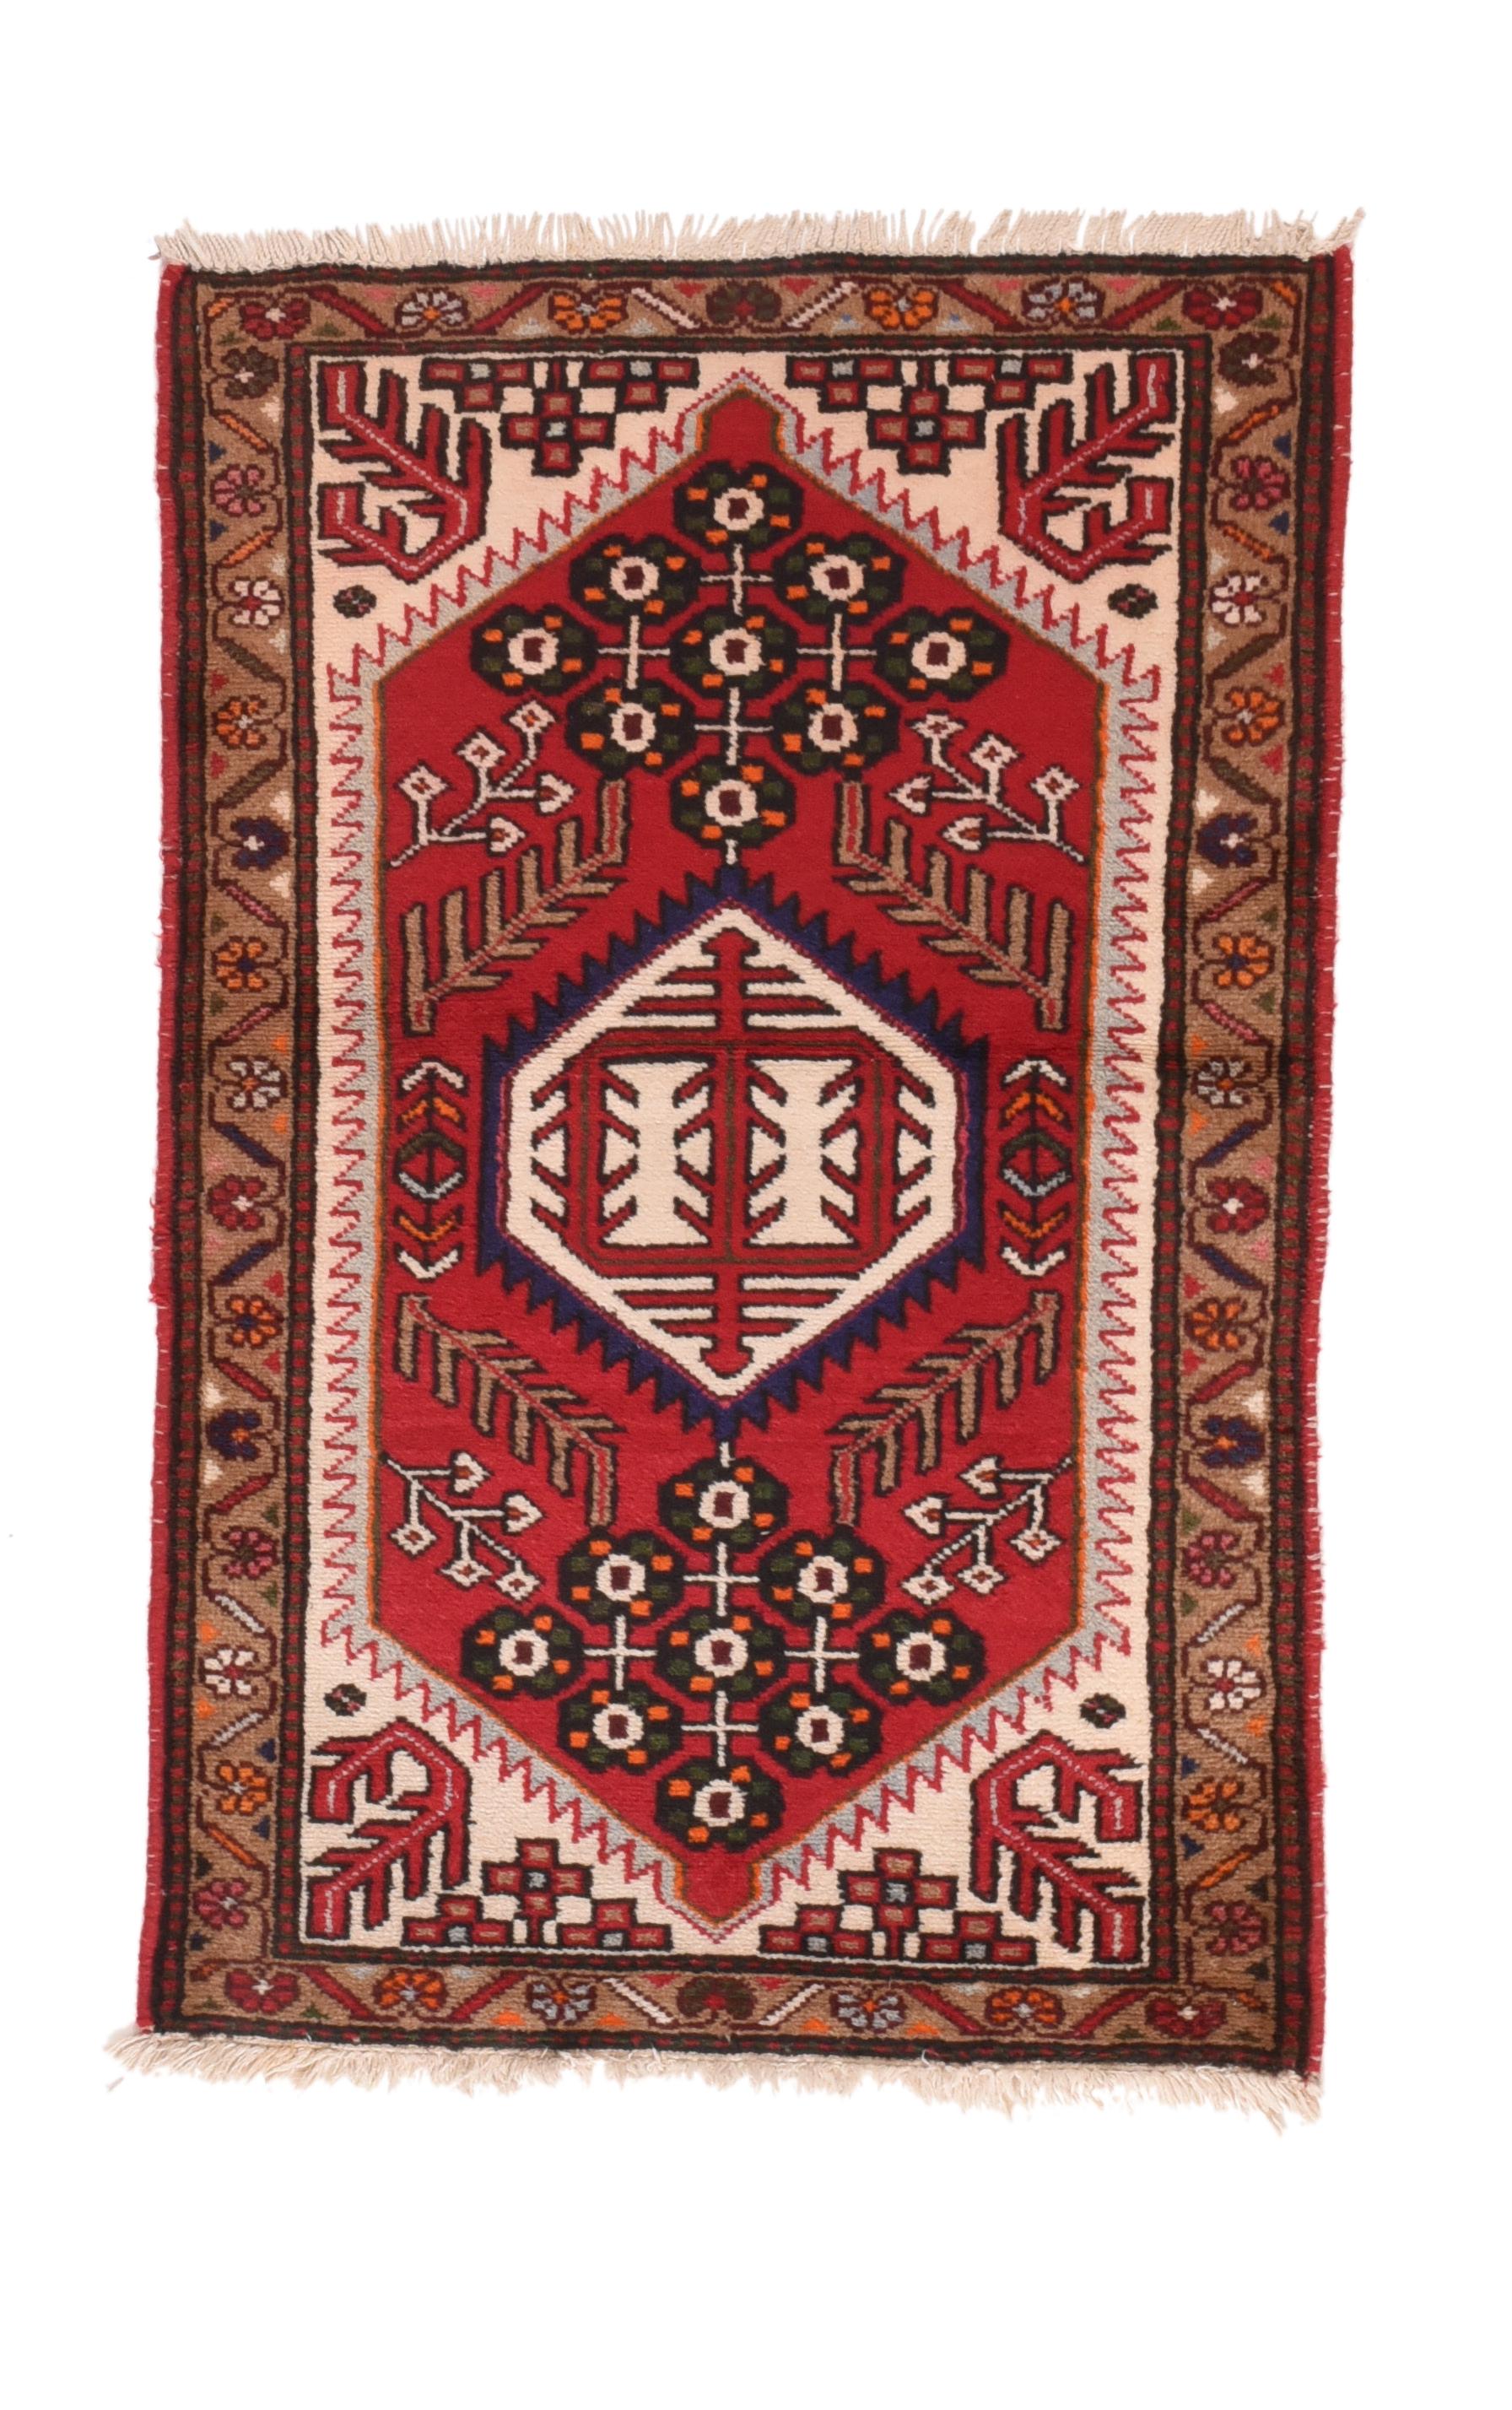 Hand-Knotted Fine Semi Antique Hamedan Persian Rug, Hand Knotted, circa 1950